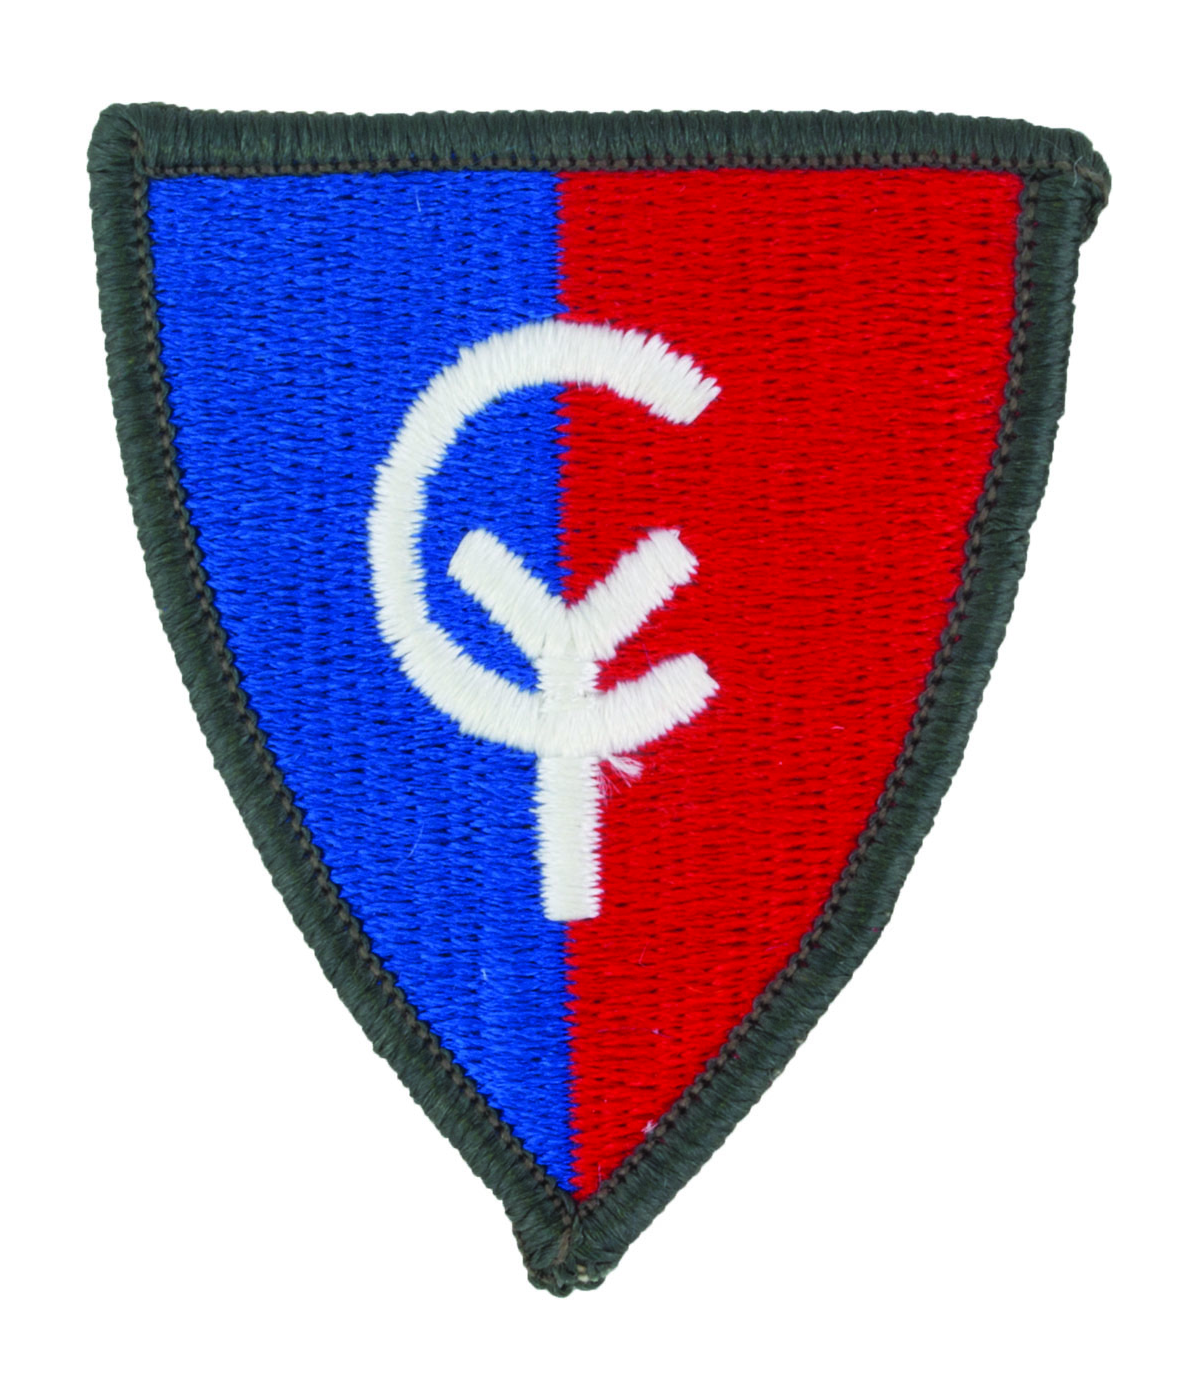 38th Infantry Division Patch - Full Color Dress